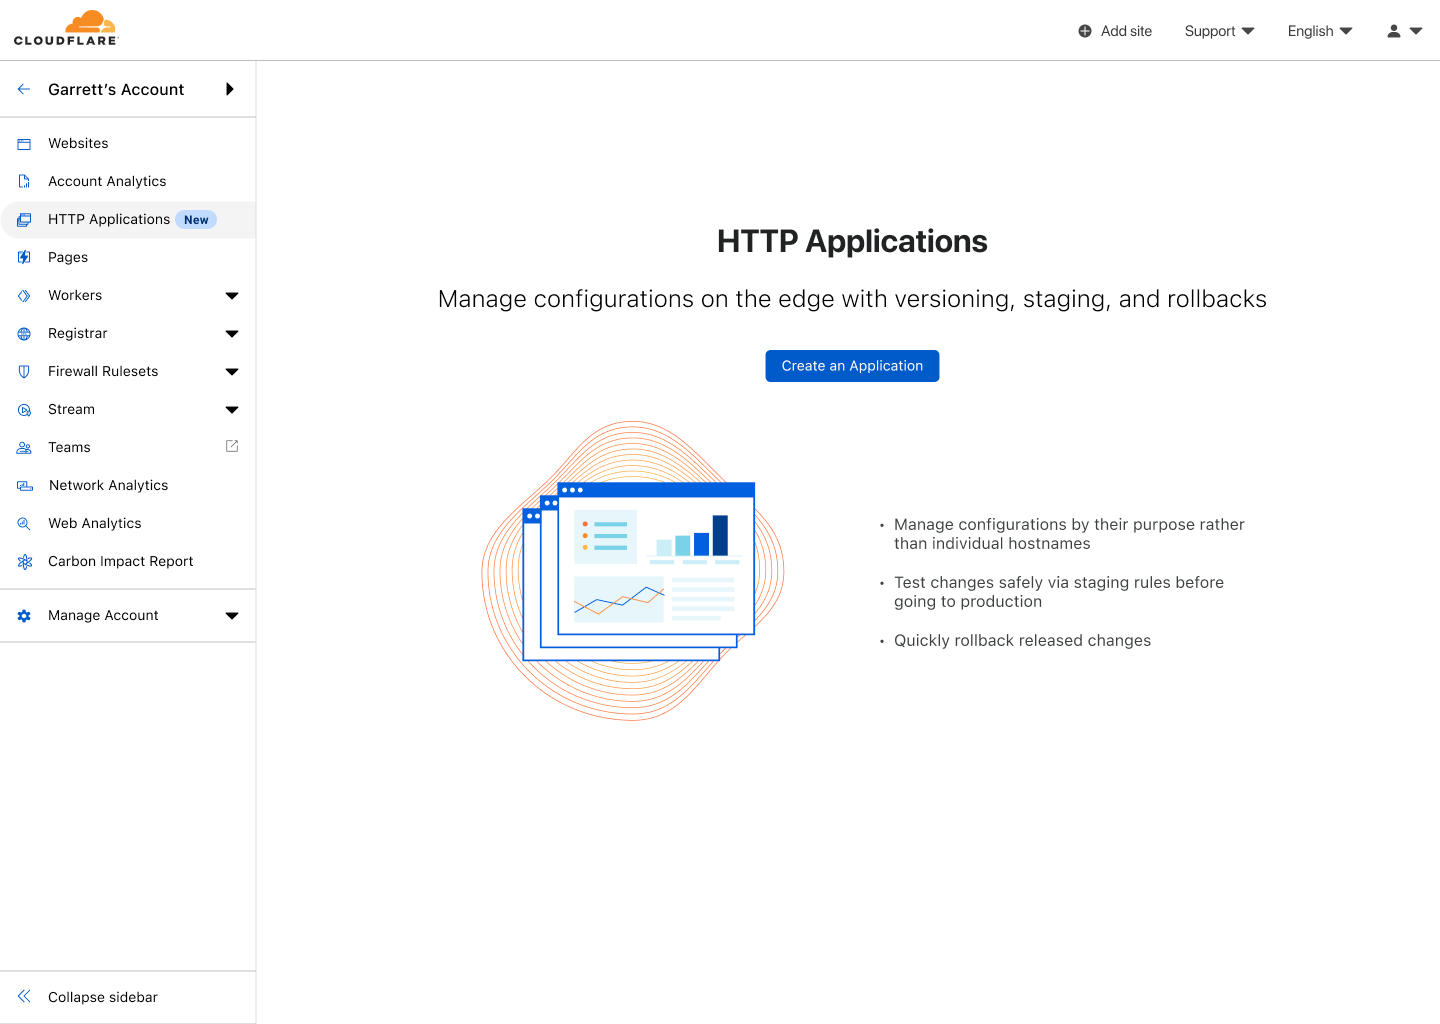 Version and Stage Configuration Changes with HTTP Applications in Beta